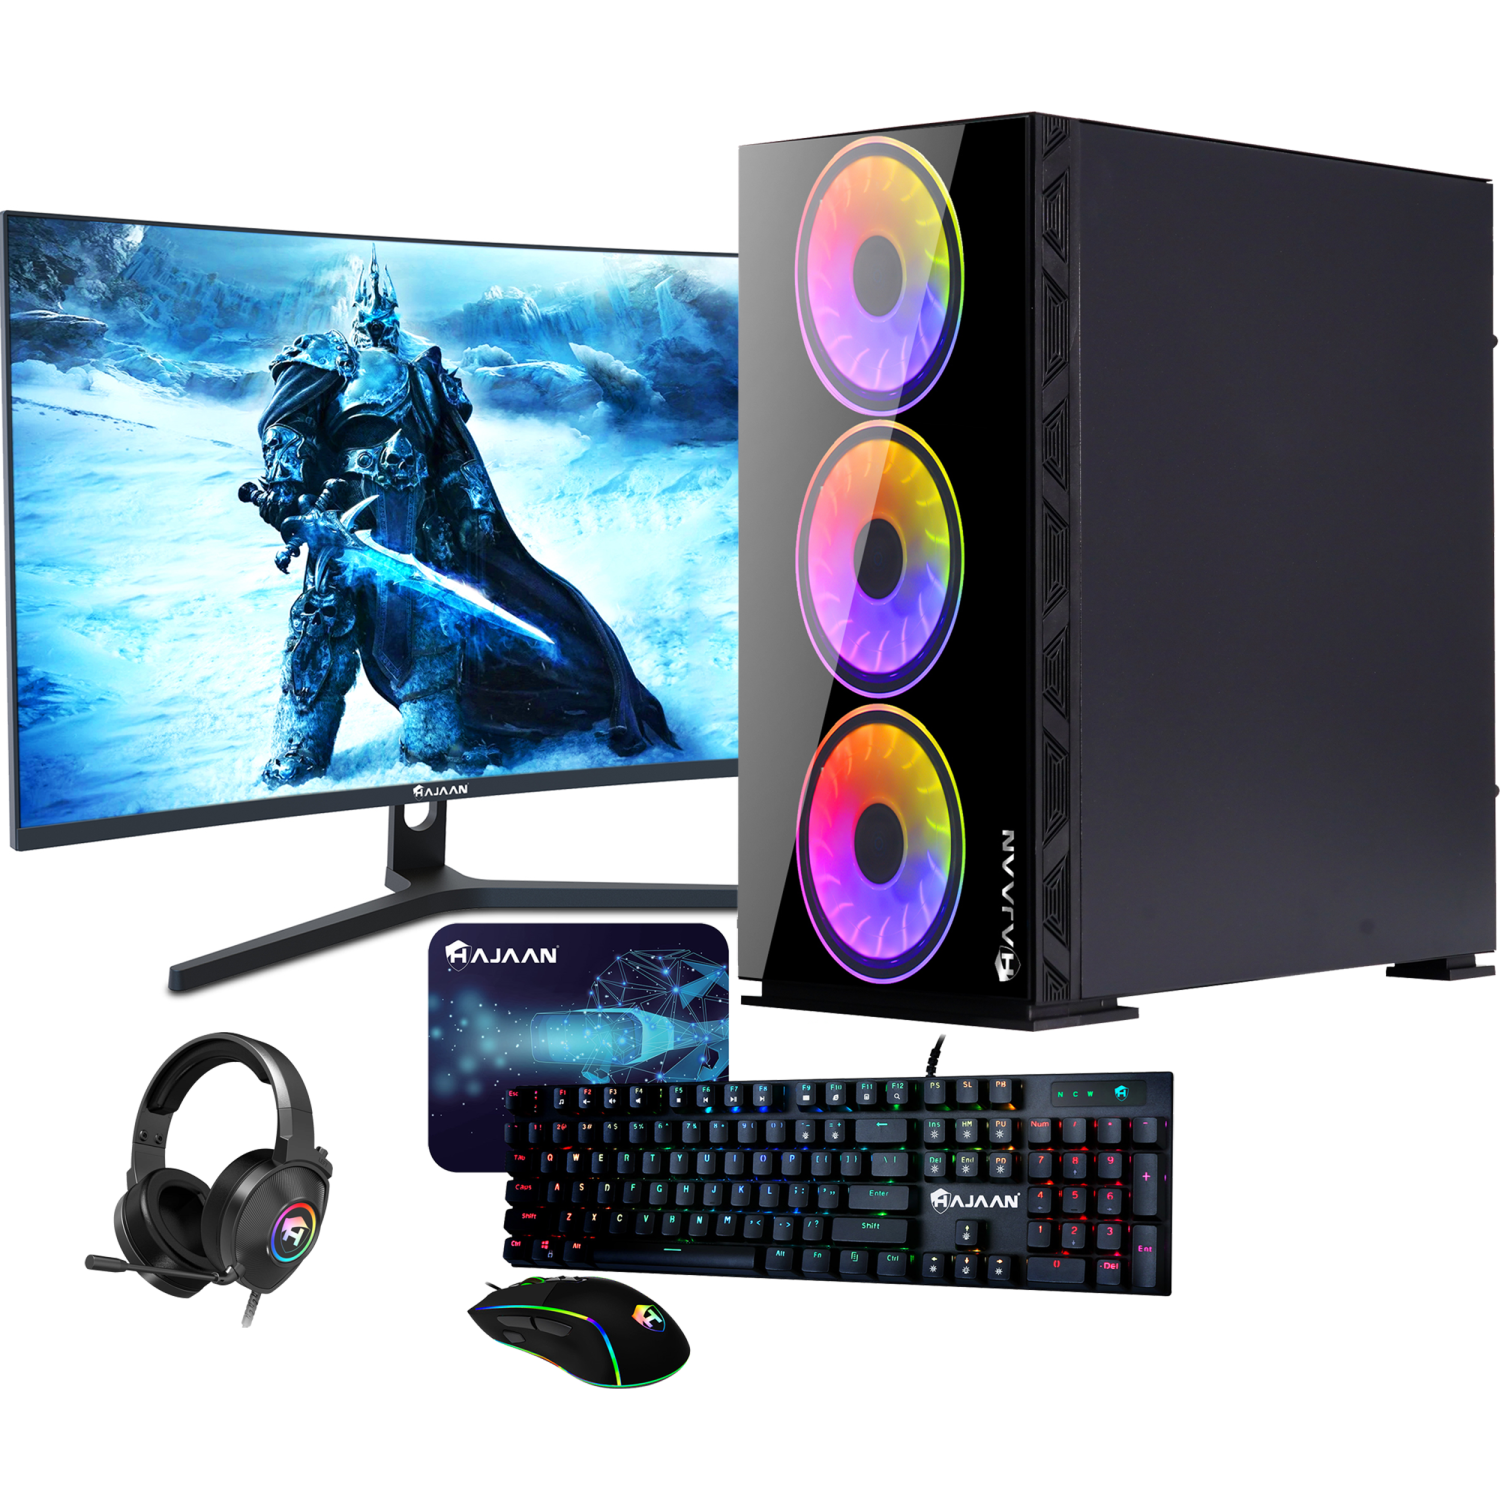 Refurbished (Excellent) Gaming PC Desktop Tower with 24″ Gaming Monitor, Intel Core i7 3.6GHz, GeForce GTX 1660 Super 6G GDDR6, 32GB RAM 1TB SSD, RGB Keyboard Mouse, ACWiFi, W10P64